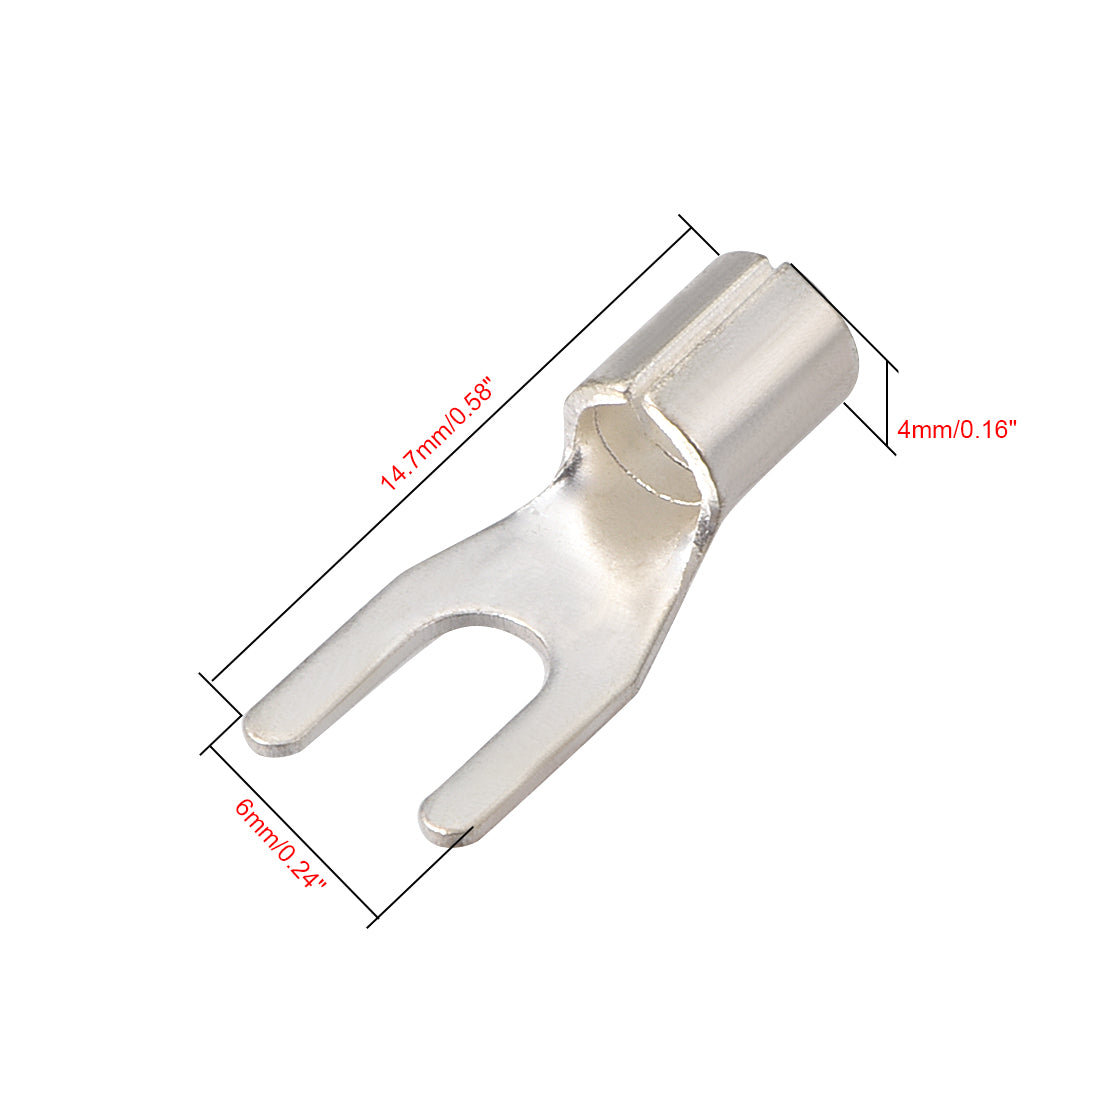 uxcell Uxcell 50Pcs UT2.5-3 Non-Insulated U-Type Brass Crimp Terminals 2-2.5mm2 Wire Connector Silver Tone